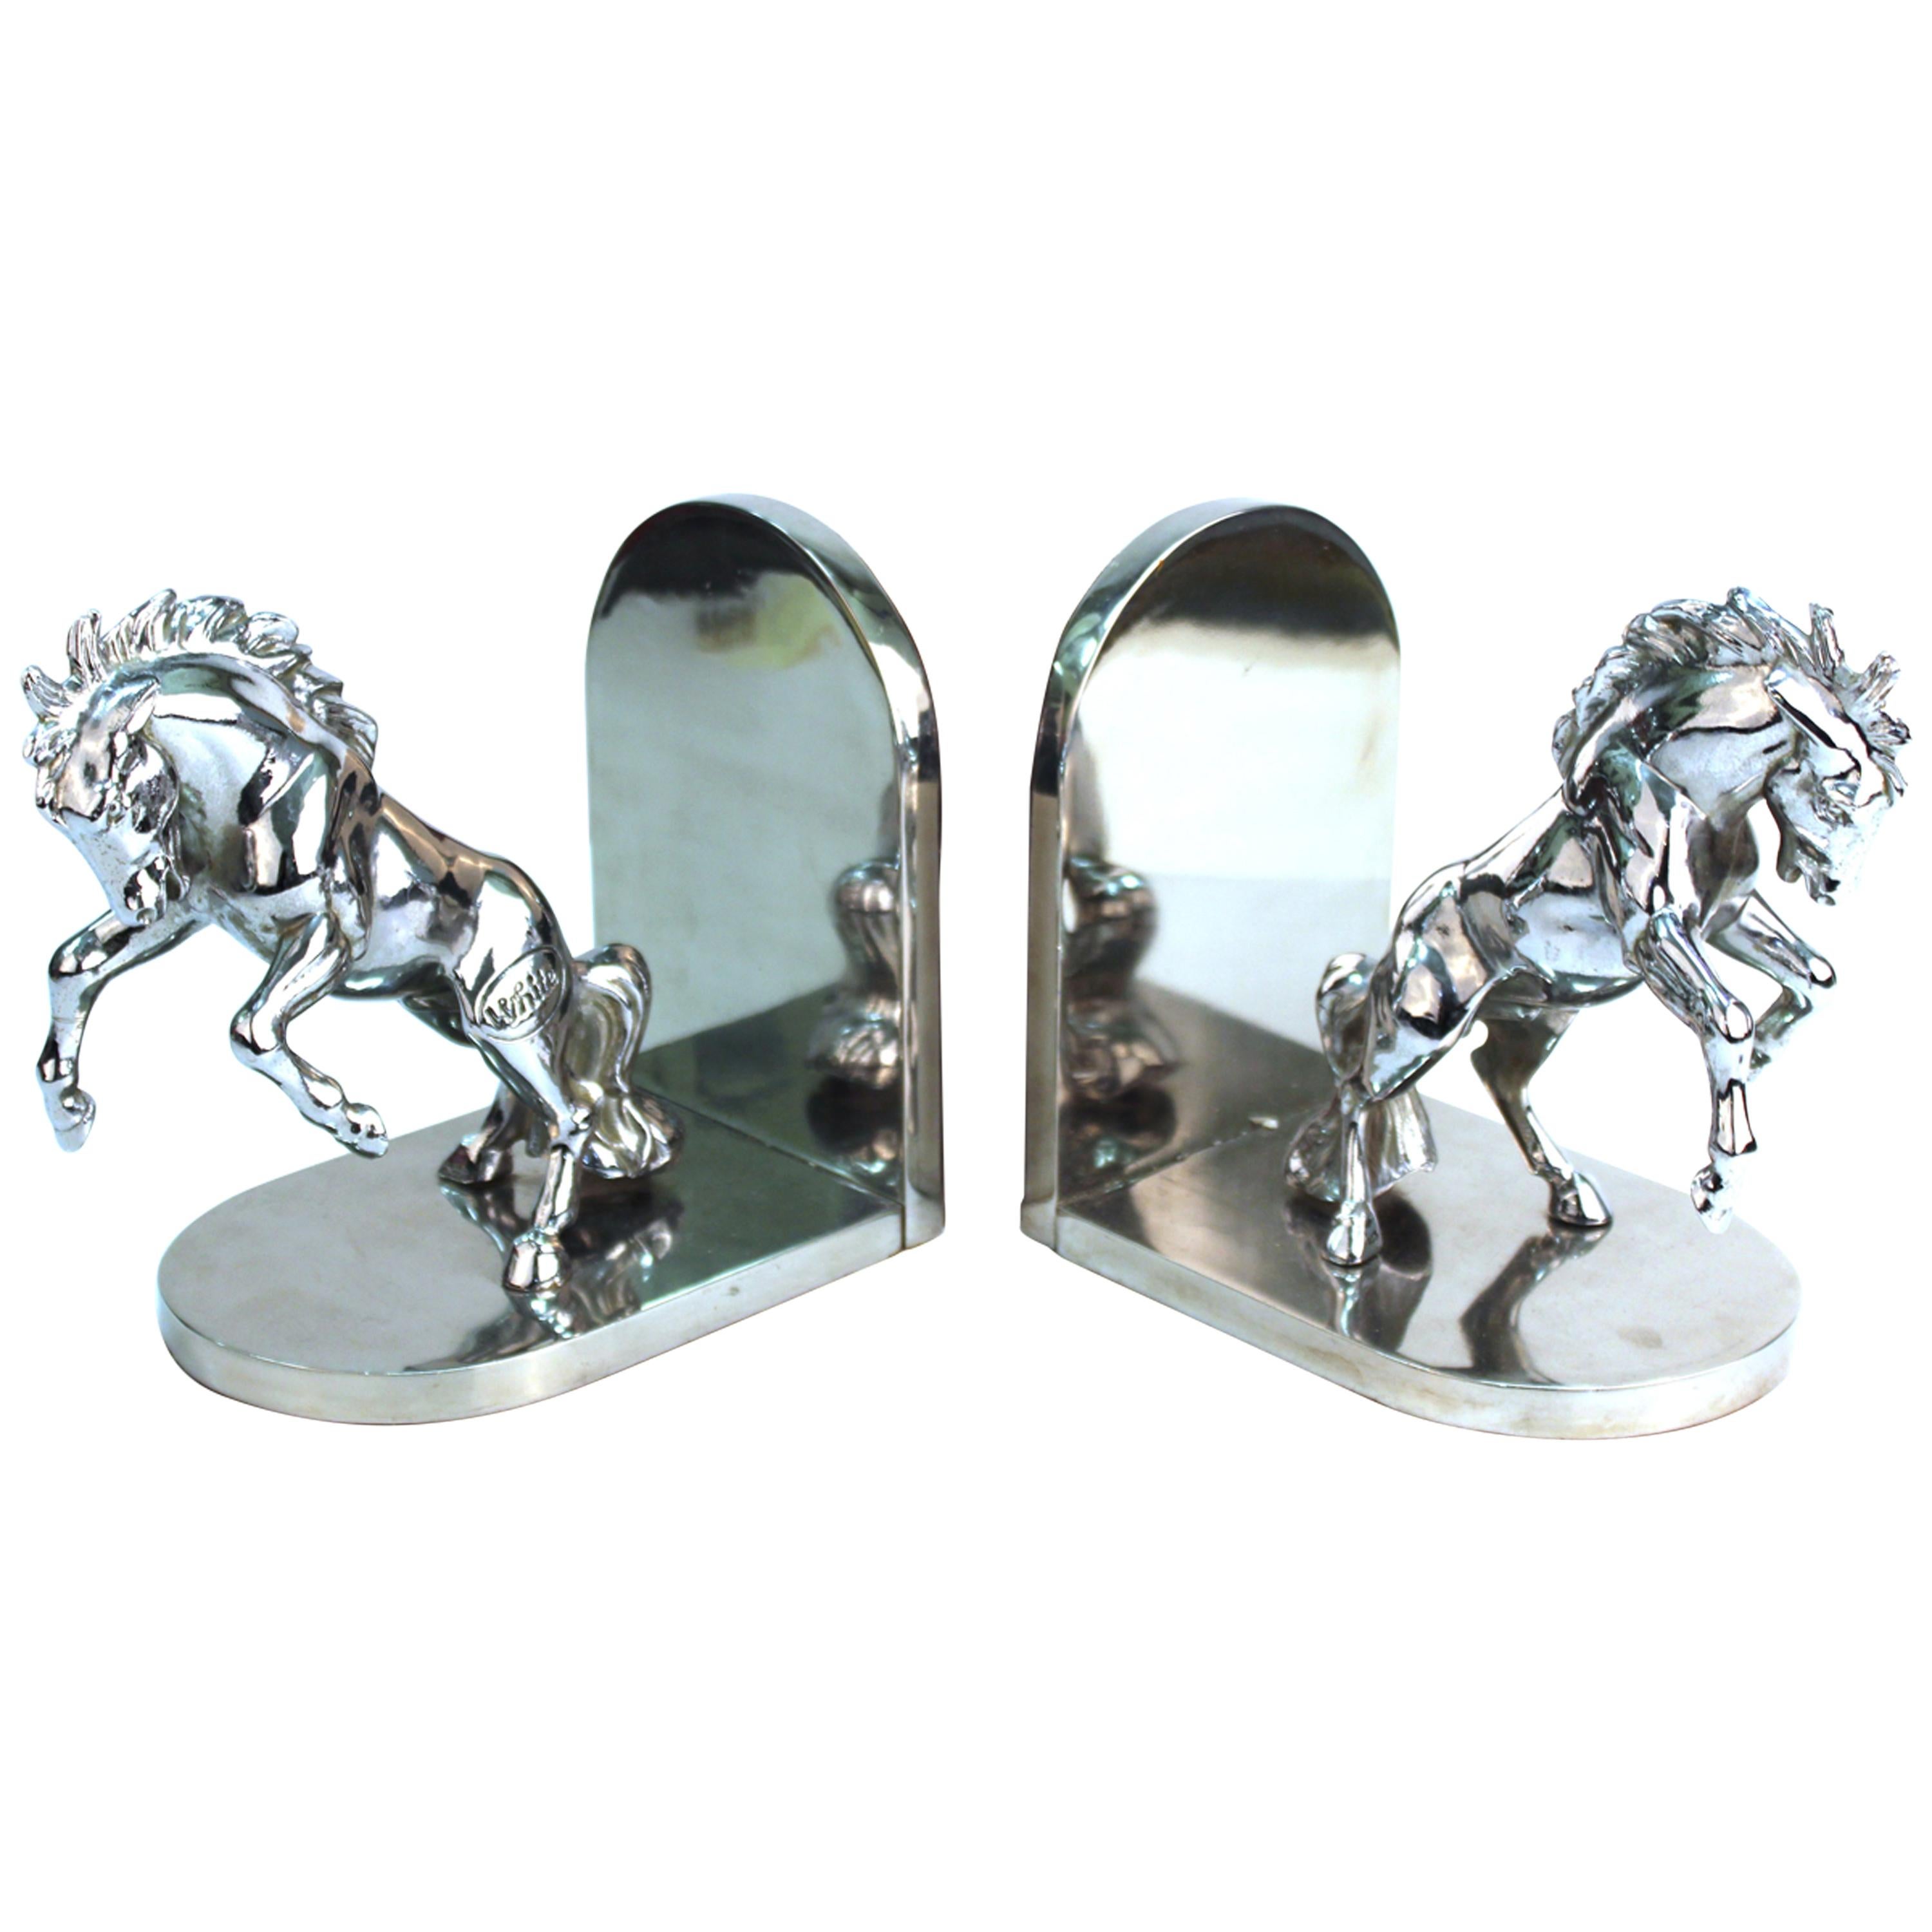 American Art Deco Silvered Bronze Horse Bookends Stamped 'White'